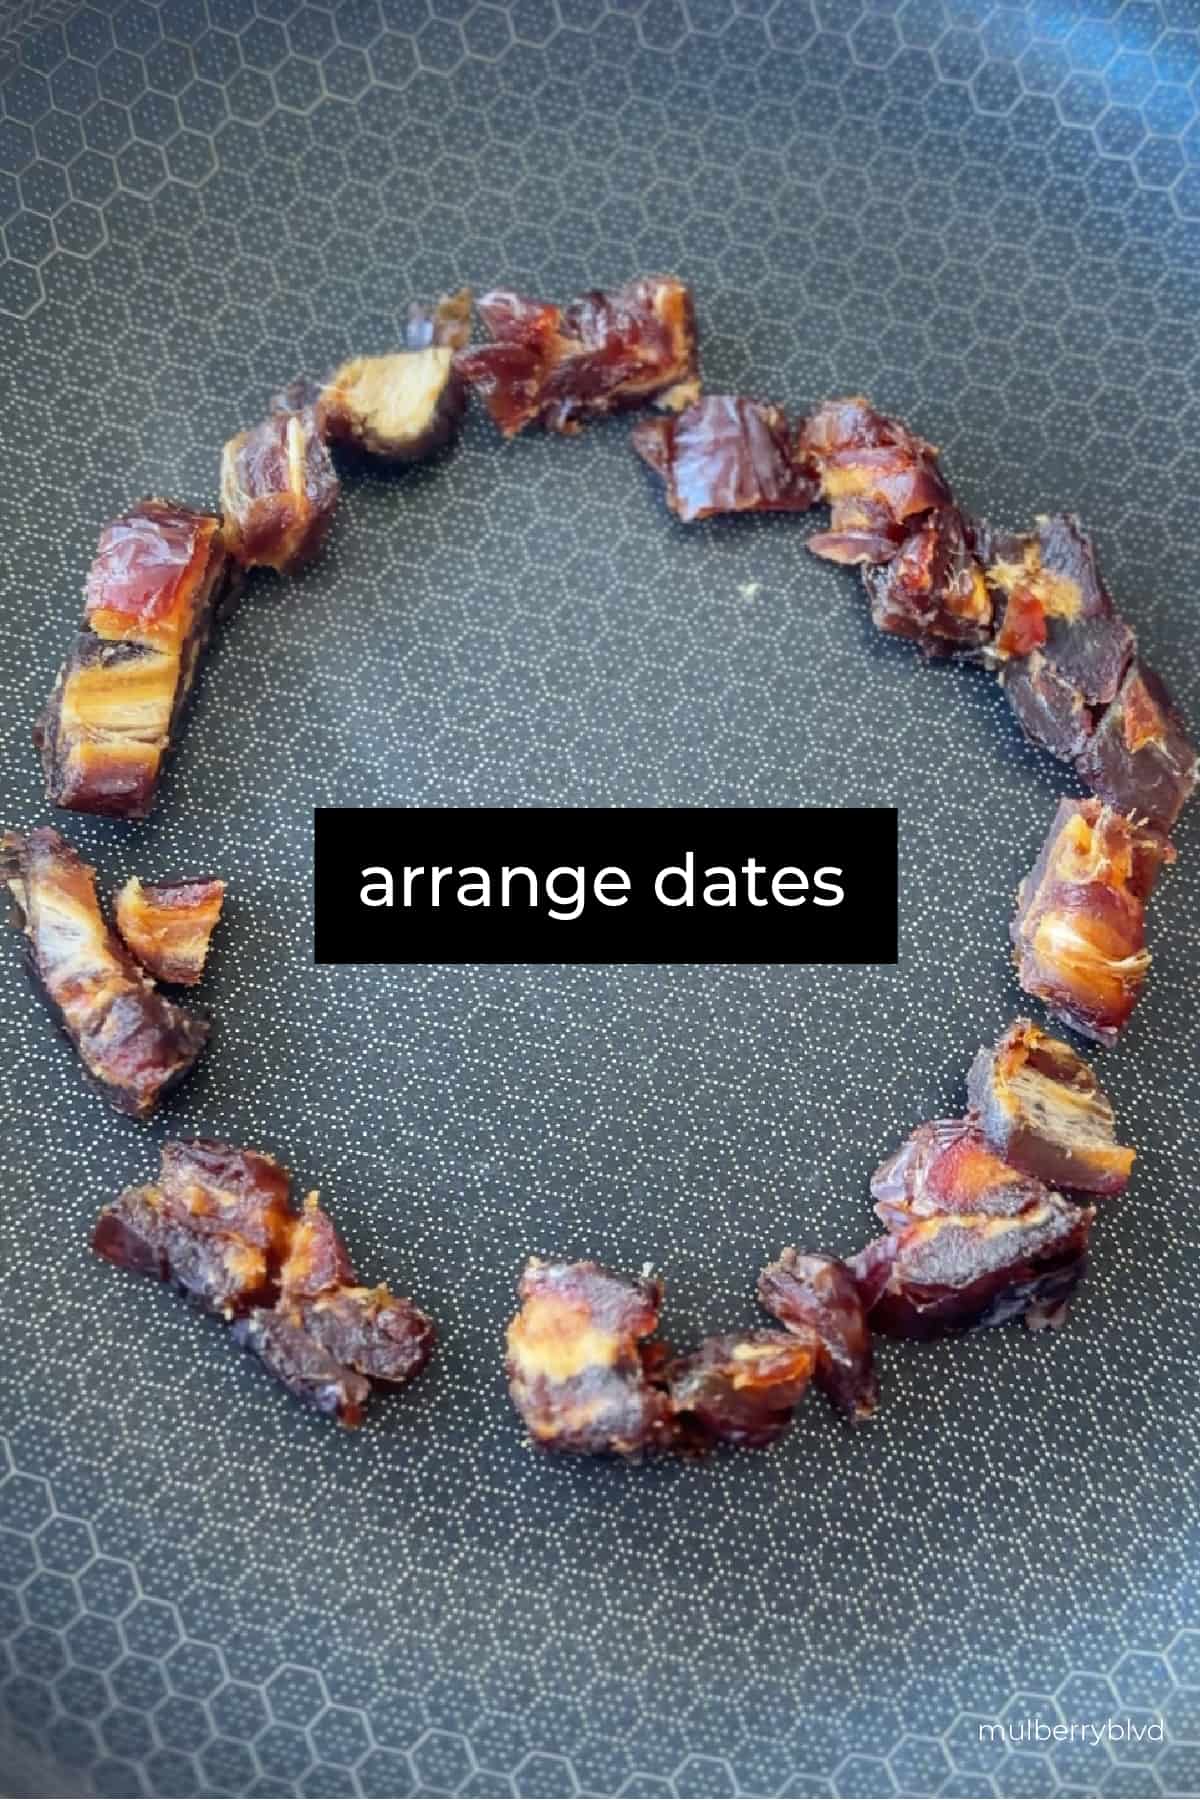 This image shows a pan, with chopped up dates arranged in a circle. The text says "arrange dates".